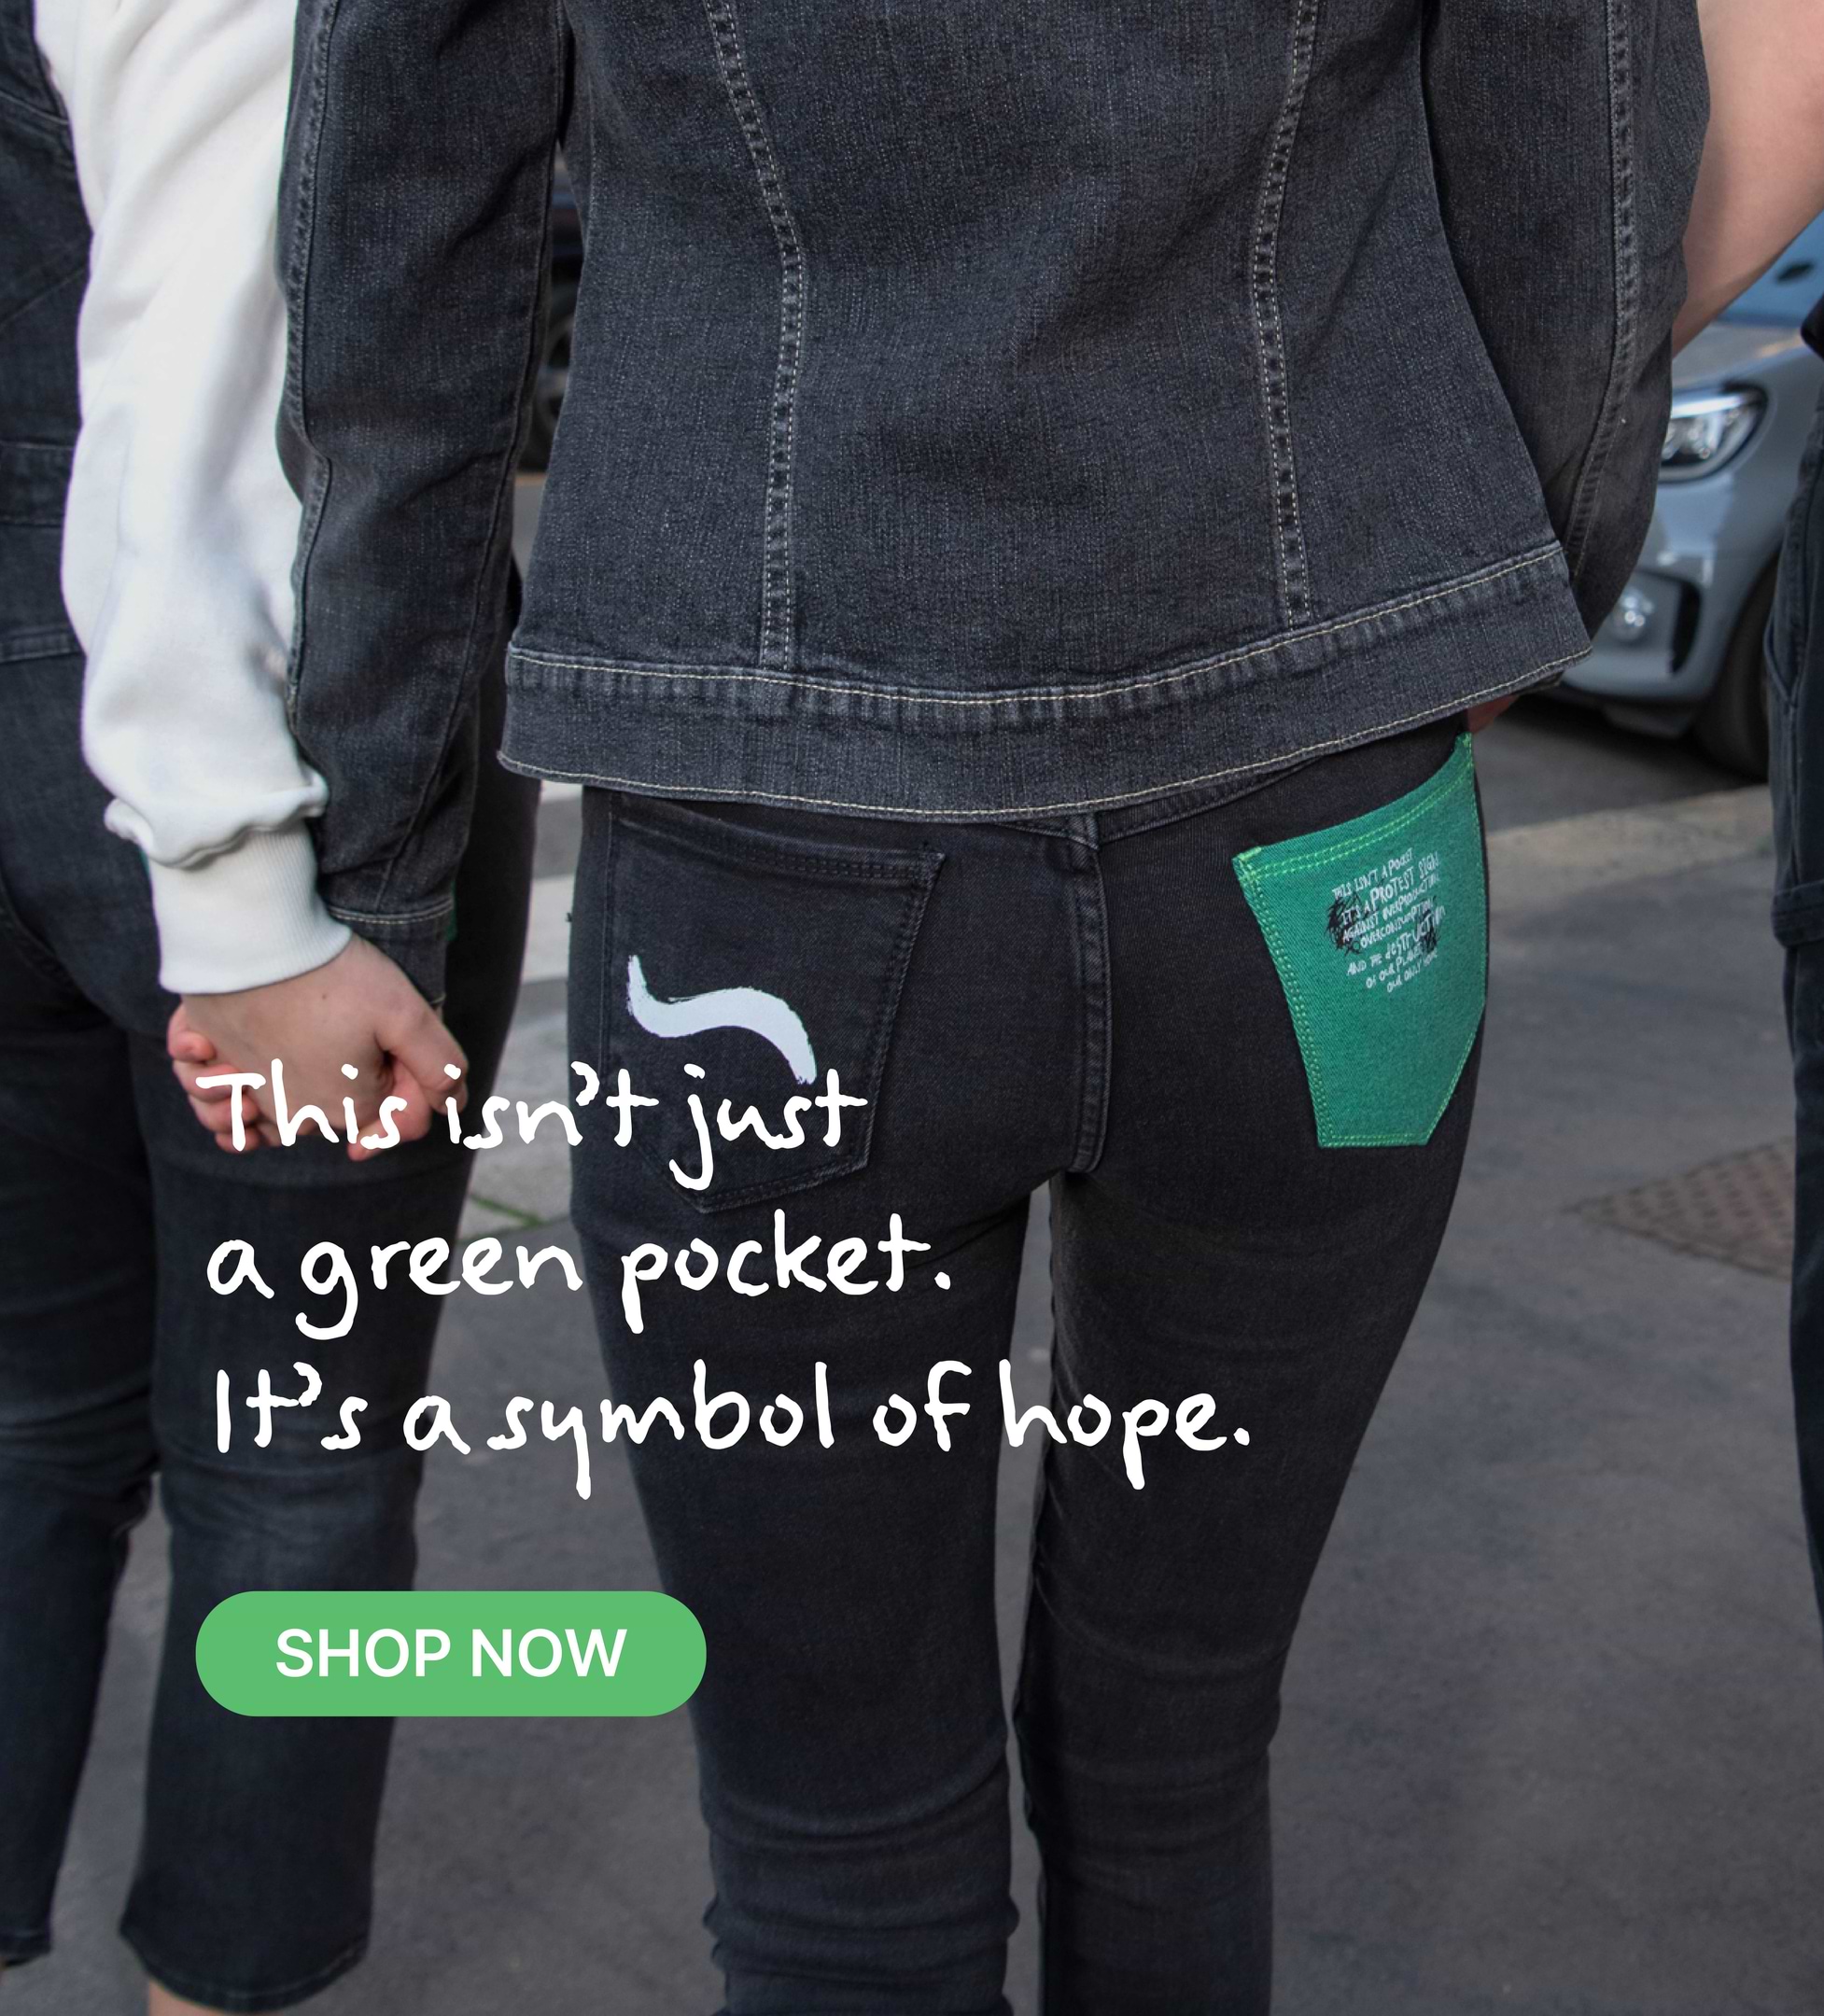 Denim upcycled with a green pocket. A new chapter in sustainable fashion.